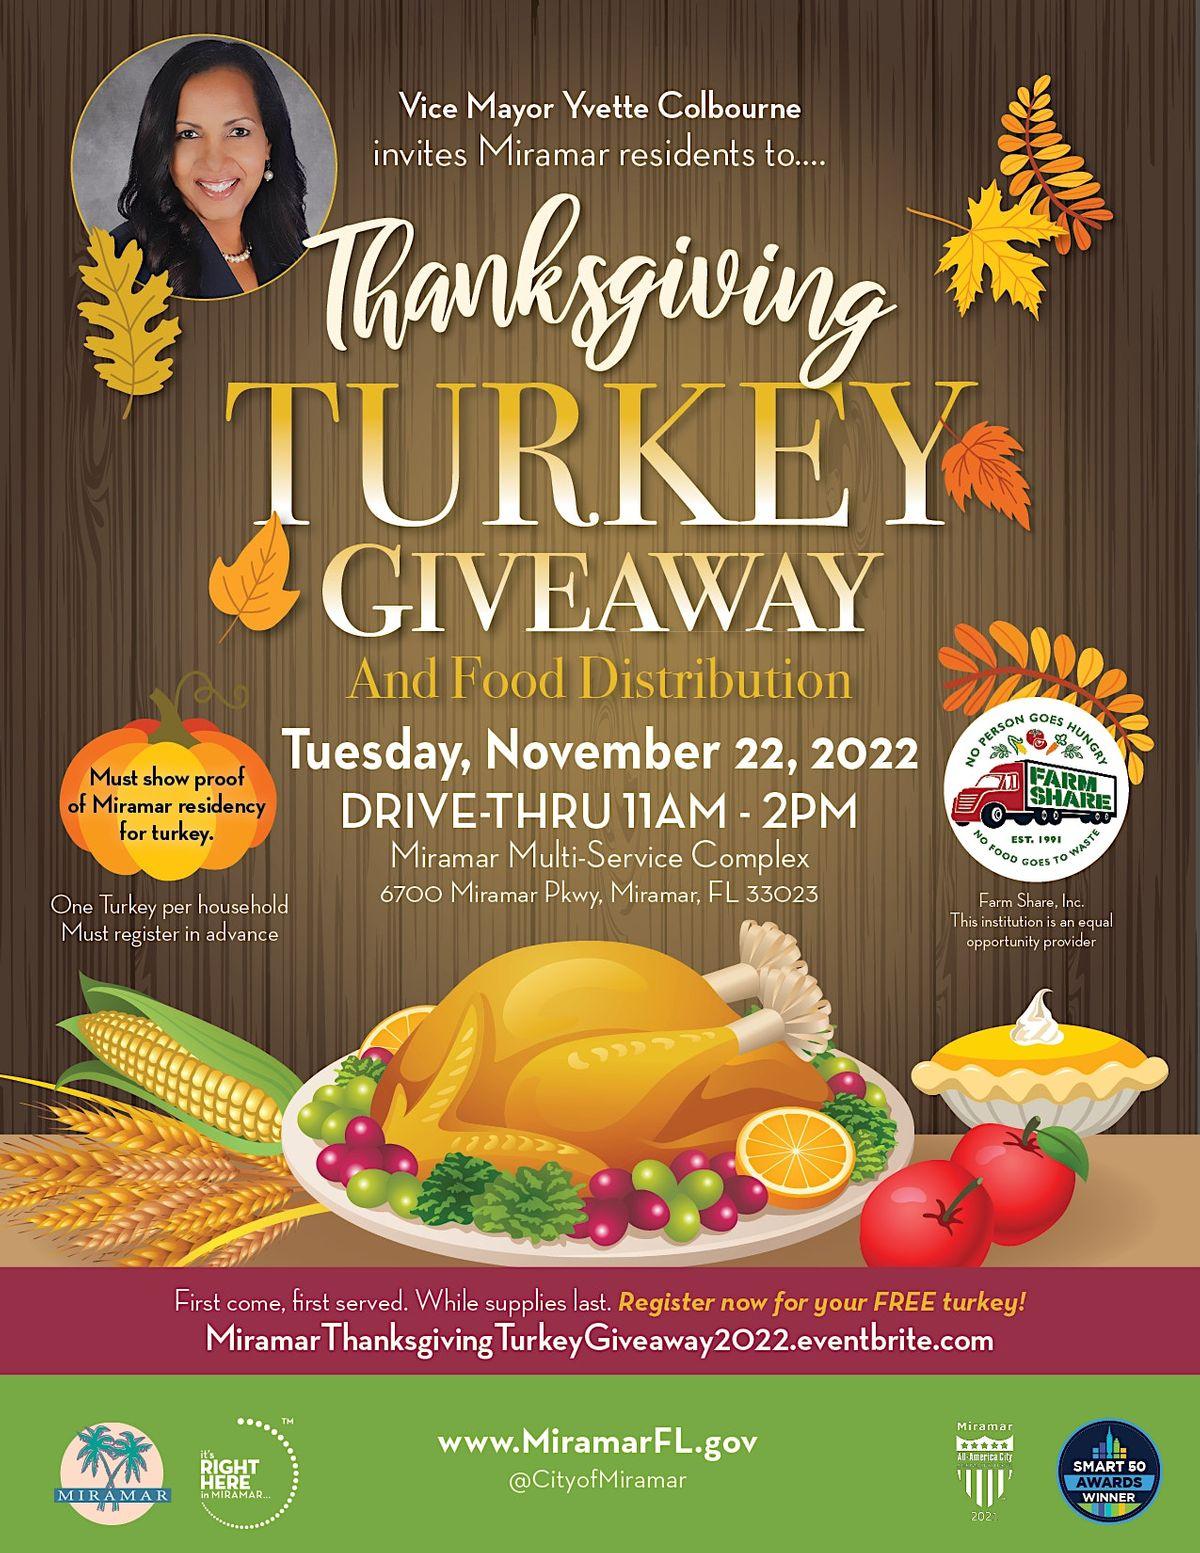 Thanksgiving Turkey Giveaway and Food Distribution